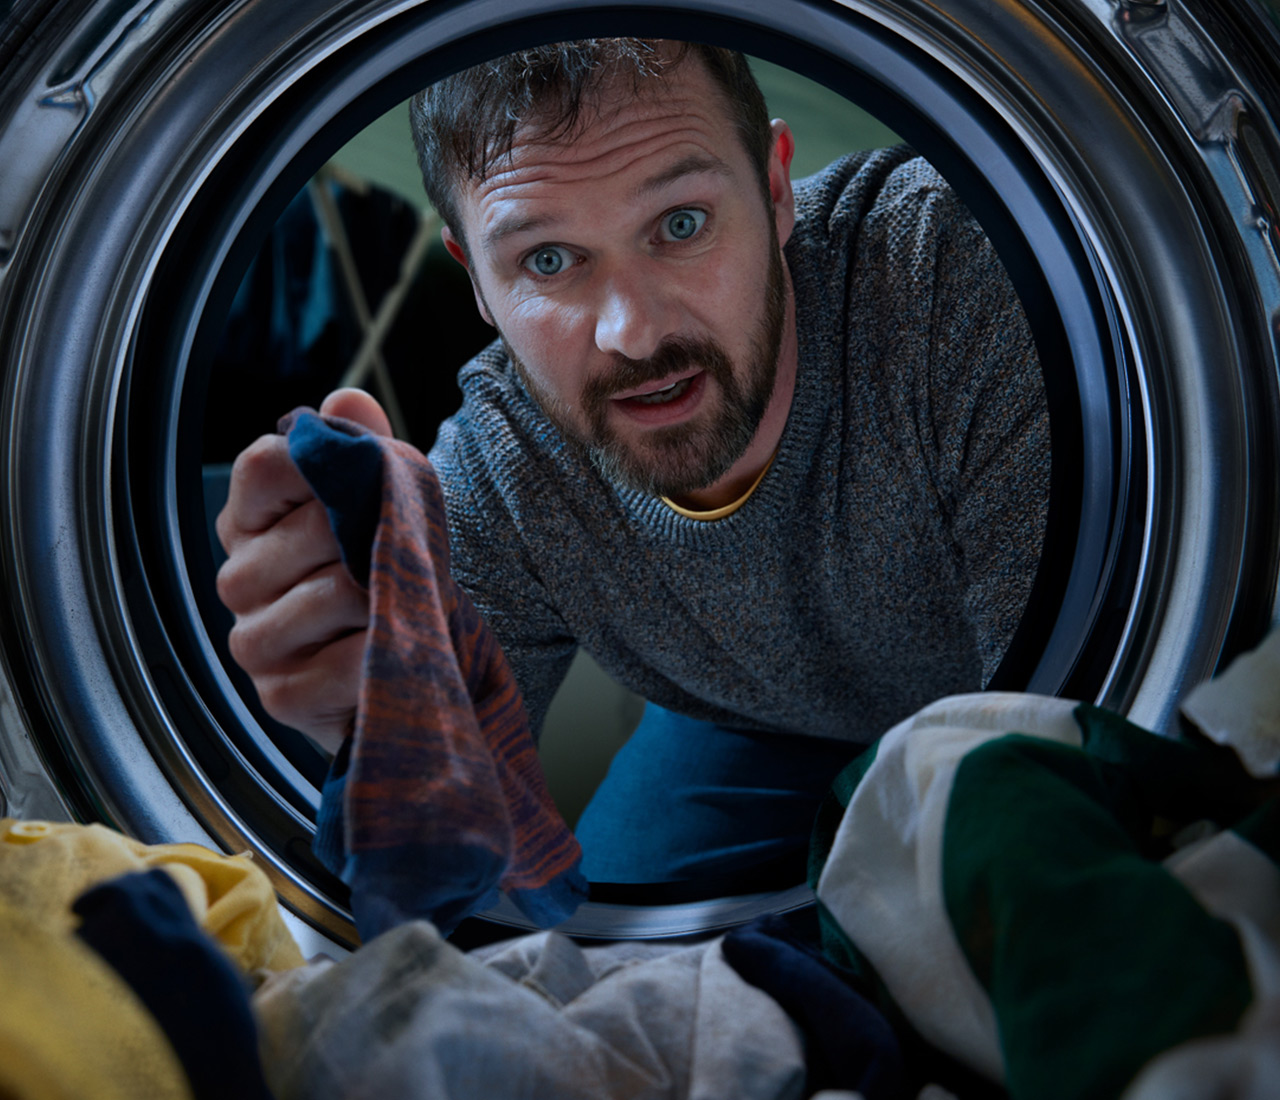 Man looking into the front load washing machine.